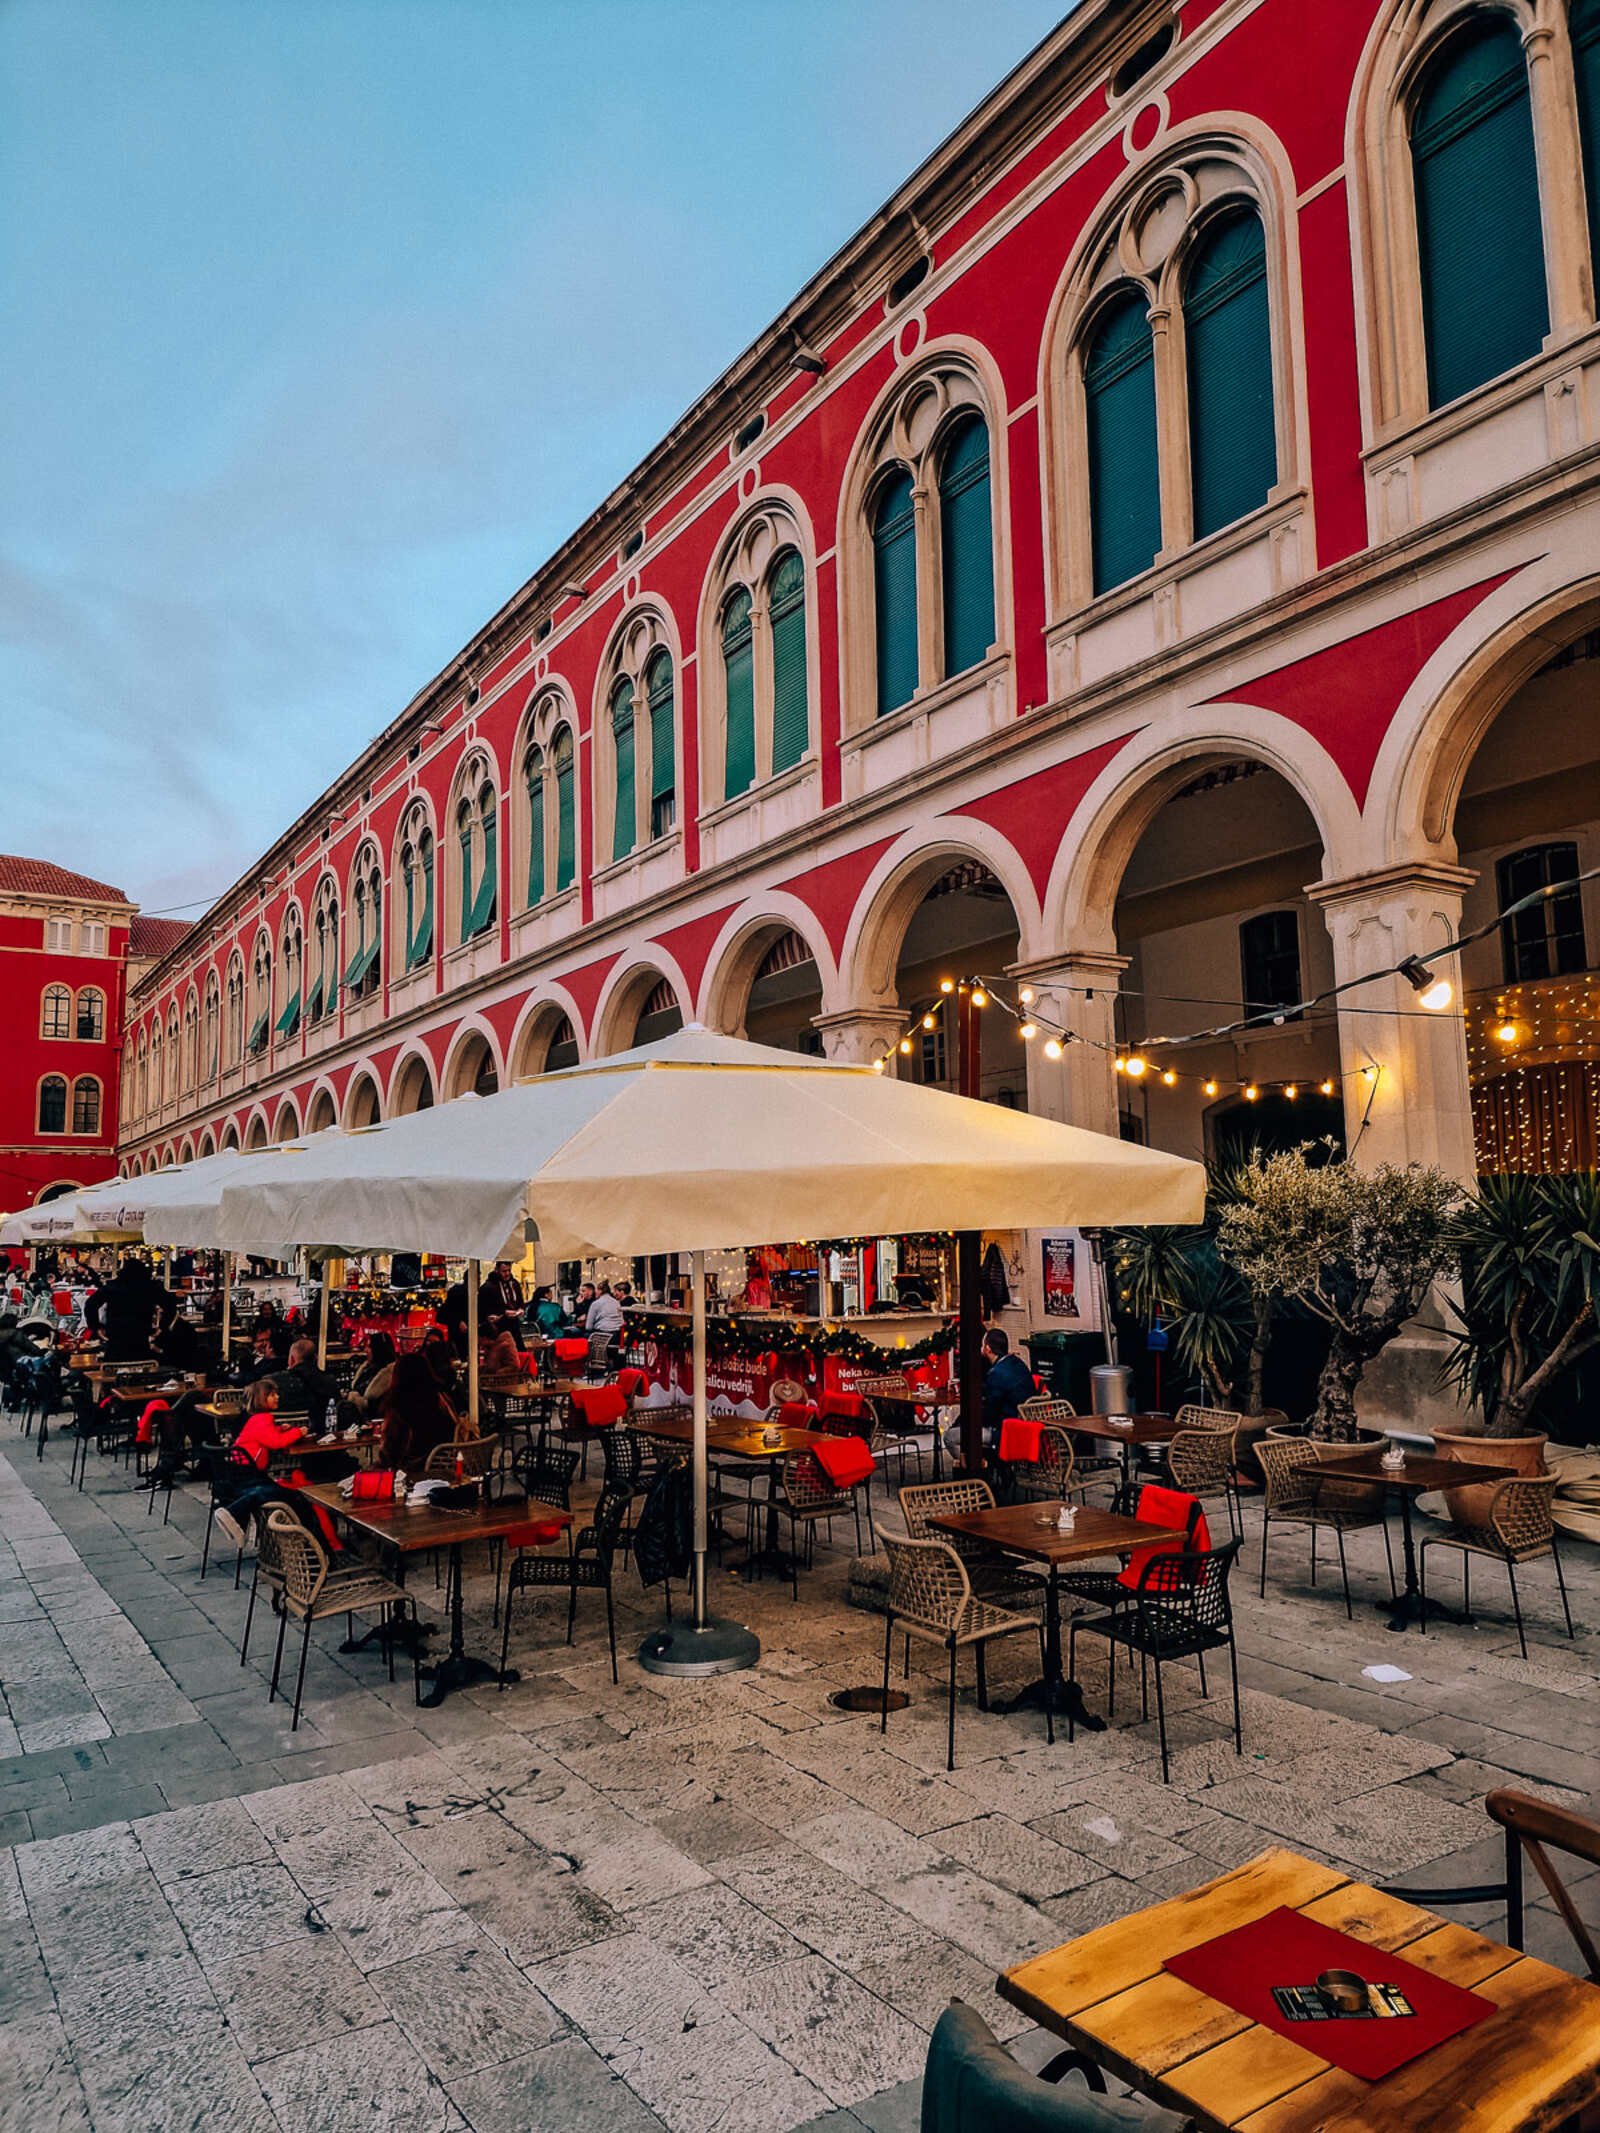 A large outdoor seating area of a restaurant with large parasols. A colourful old building with many  archways and windows